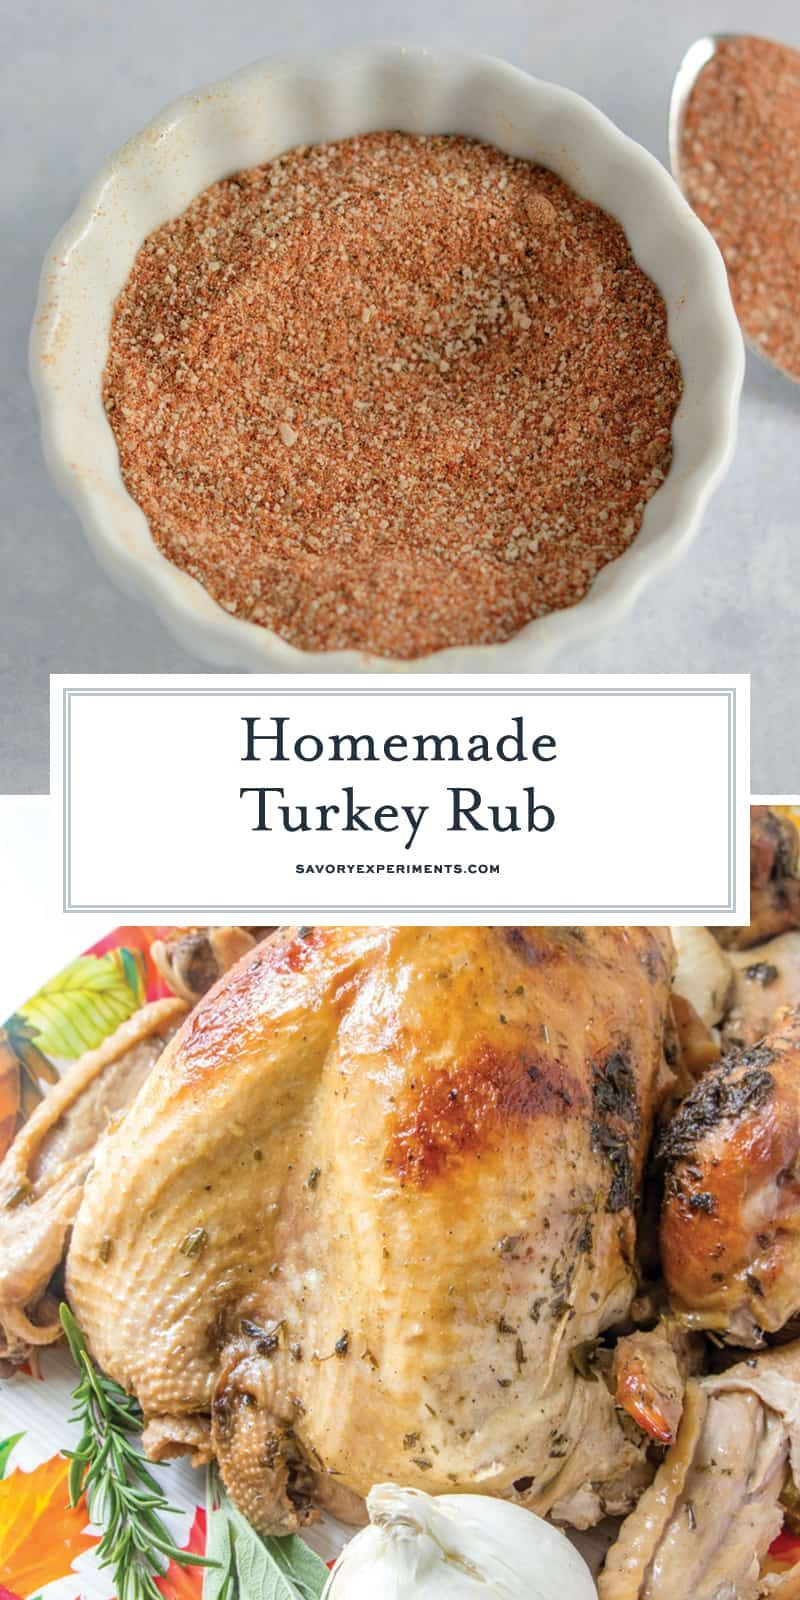 Thanksgiving Turkey Rub
 Homemade Turkey Rub is a blend of 6 easy spices and herbs